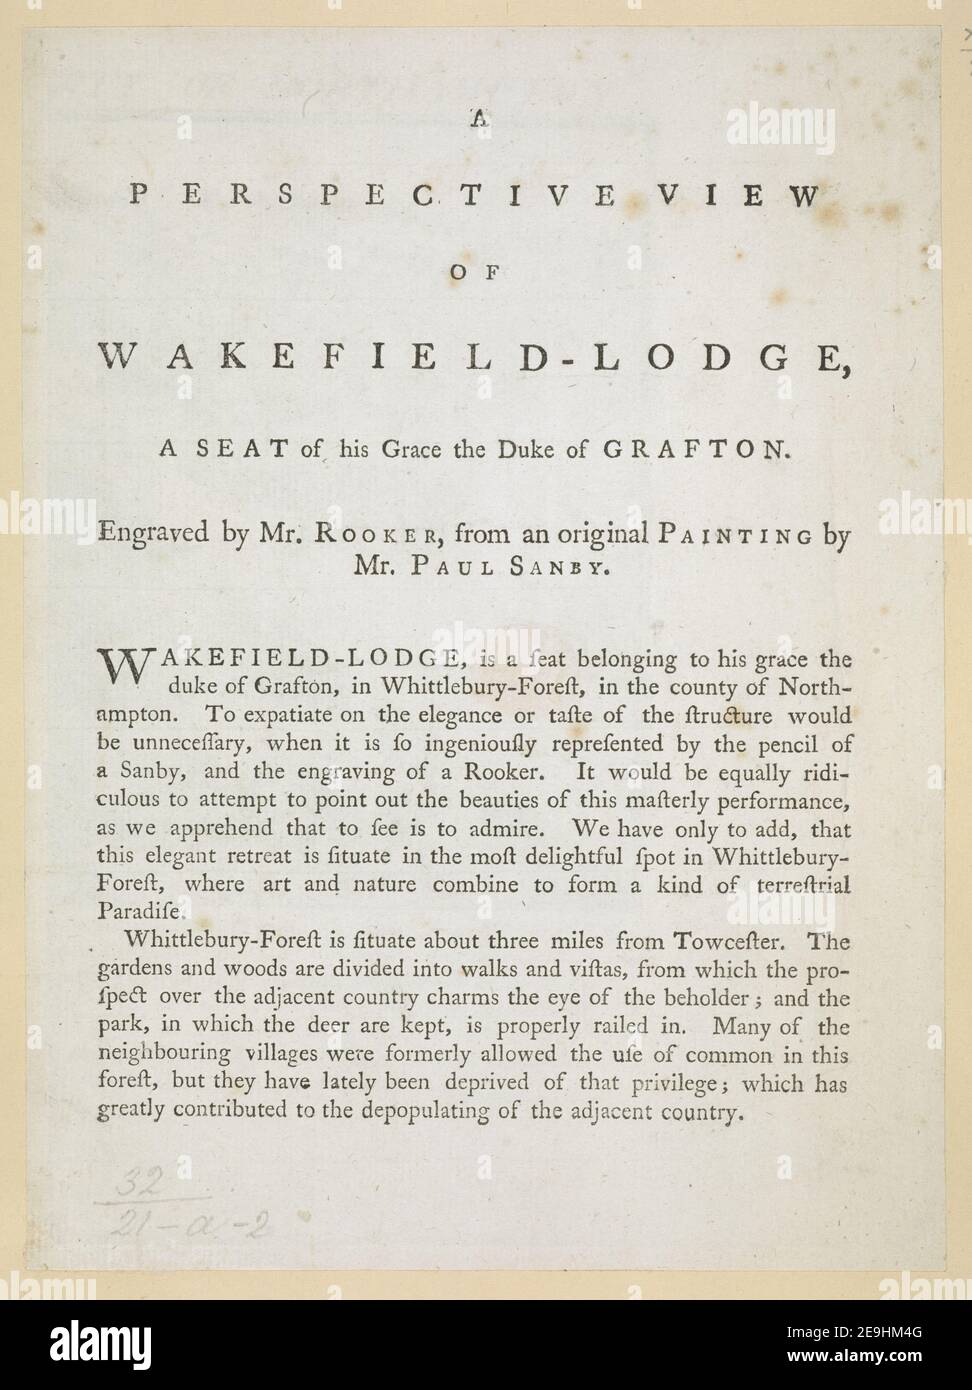 A Perspective View Of Wakefield Lodge  Visual Material information:  Title: A Perspective View Of Wakefield-Lodge ; 32.21.a-2. Place of publication: [London] Publisher: [publisher not identified] Date of publication: [1774]  Item type: 1 print Medium: letterpress Dimensions: sheet 22.6 x 16.7 cm  Former owner: George III, King of Great Britain, 1738-1820 Stock Photo